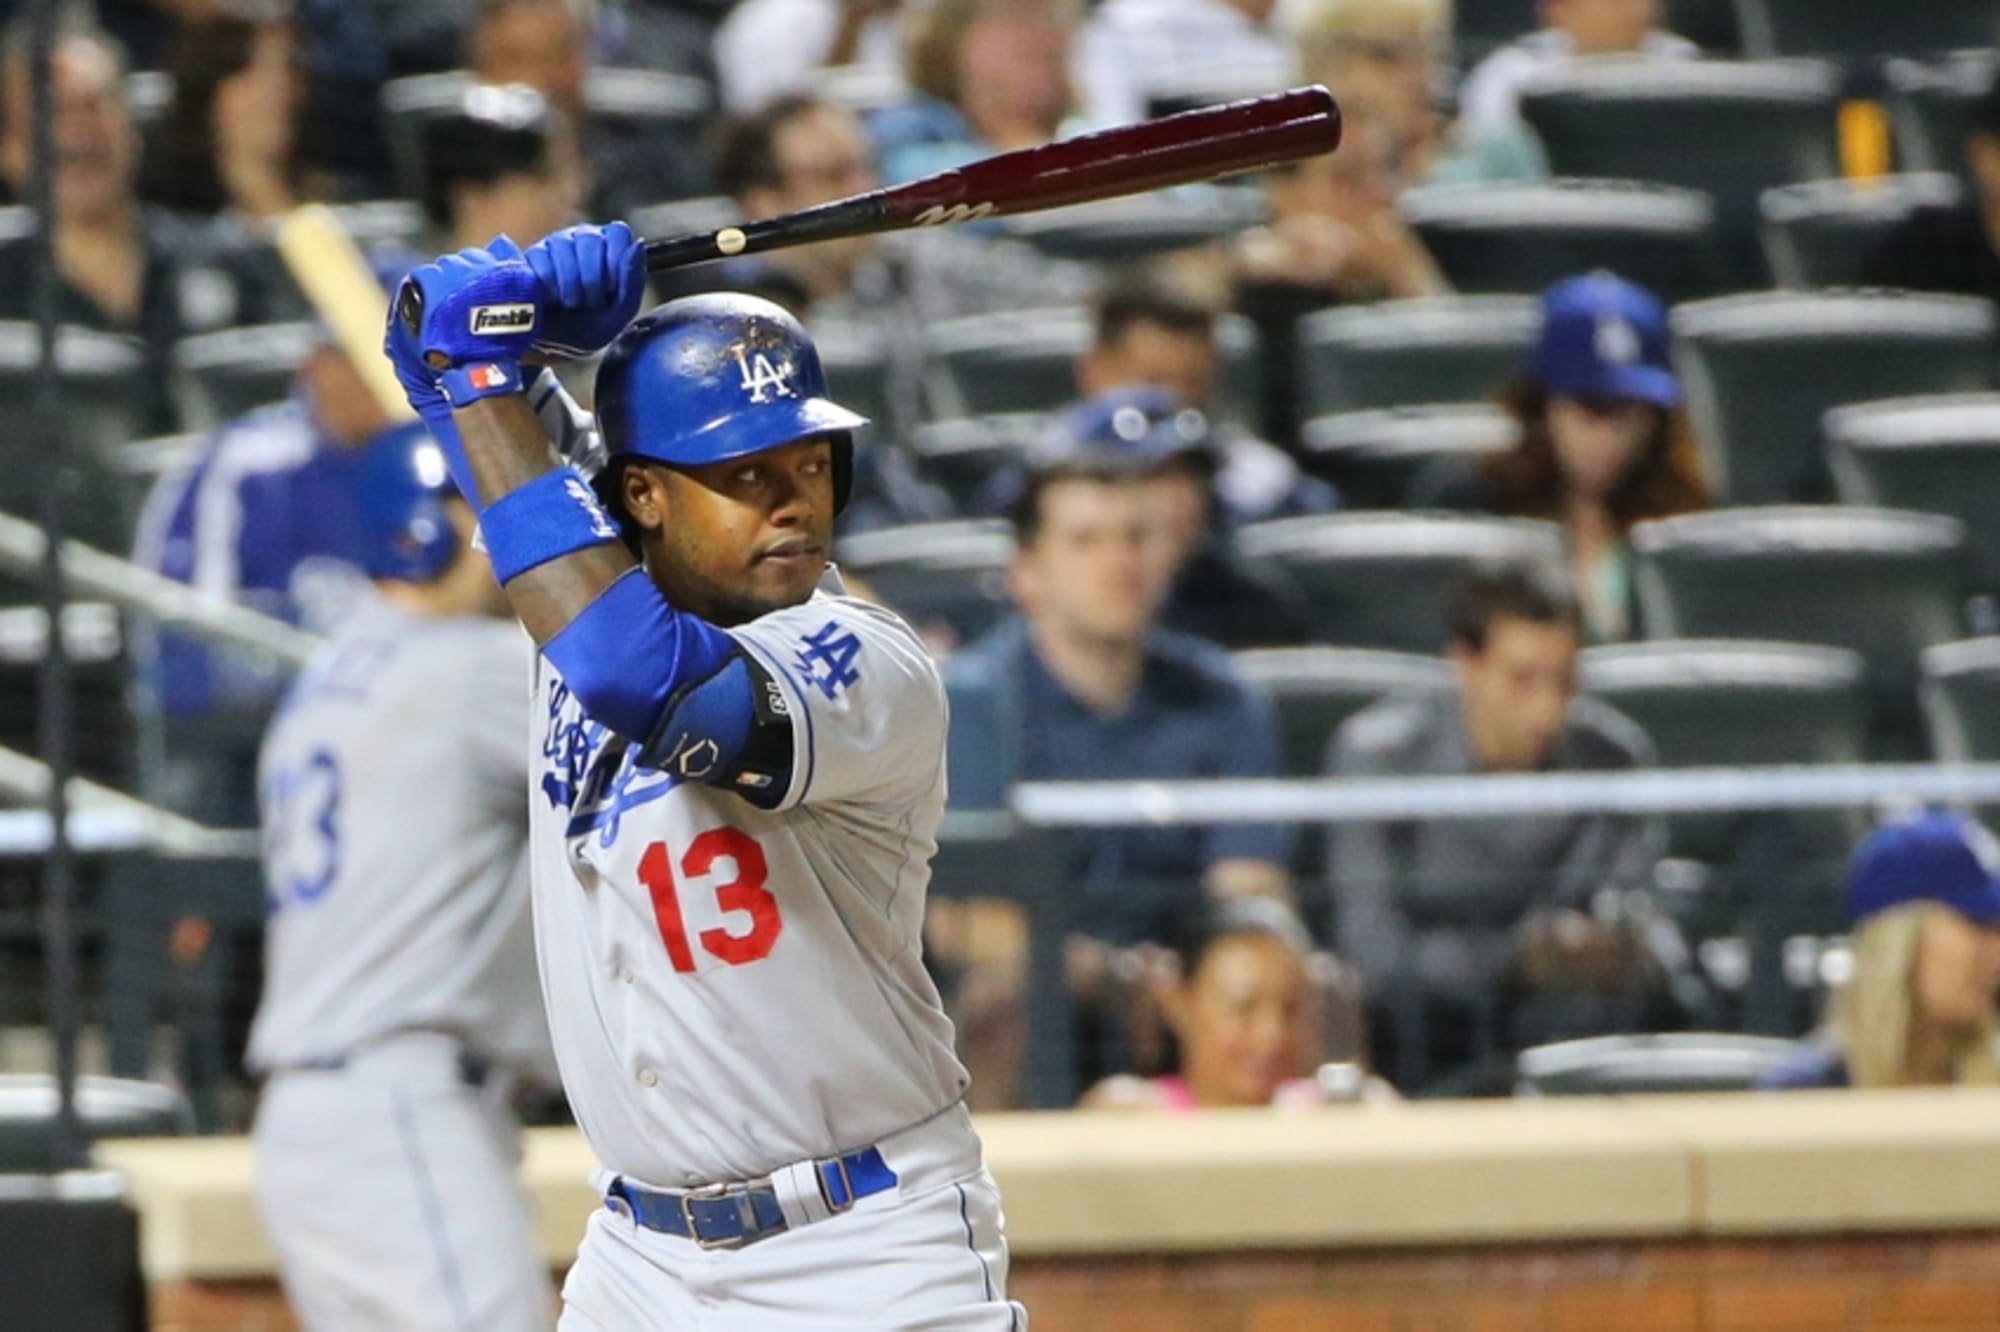 Hanley Ramirez scratched from Dodgers lineup with sore calf